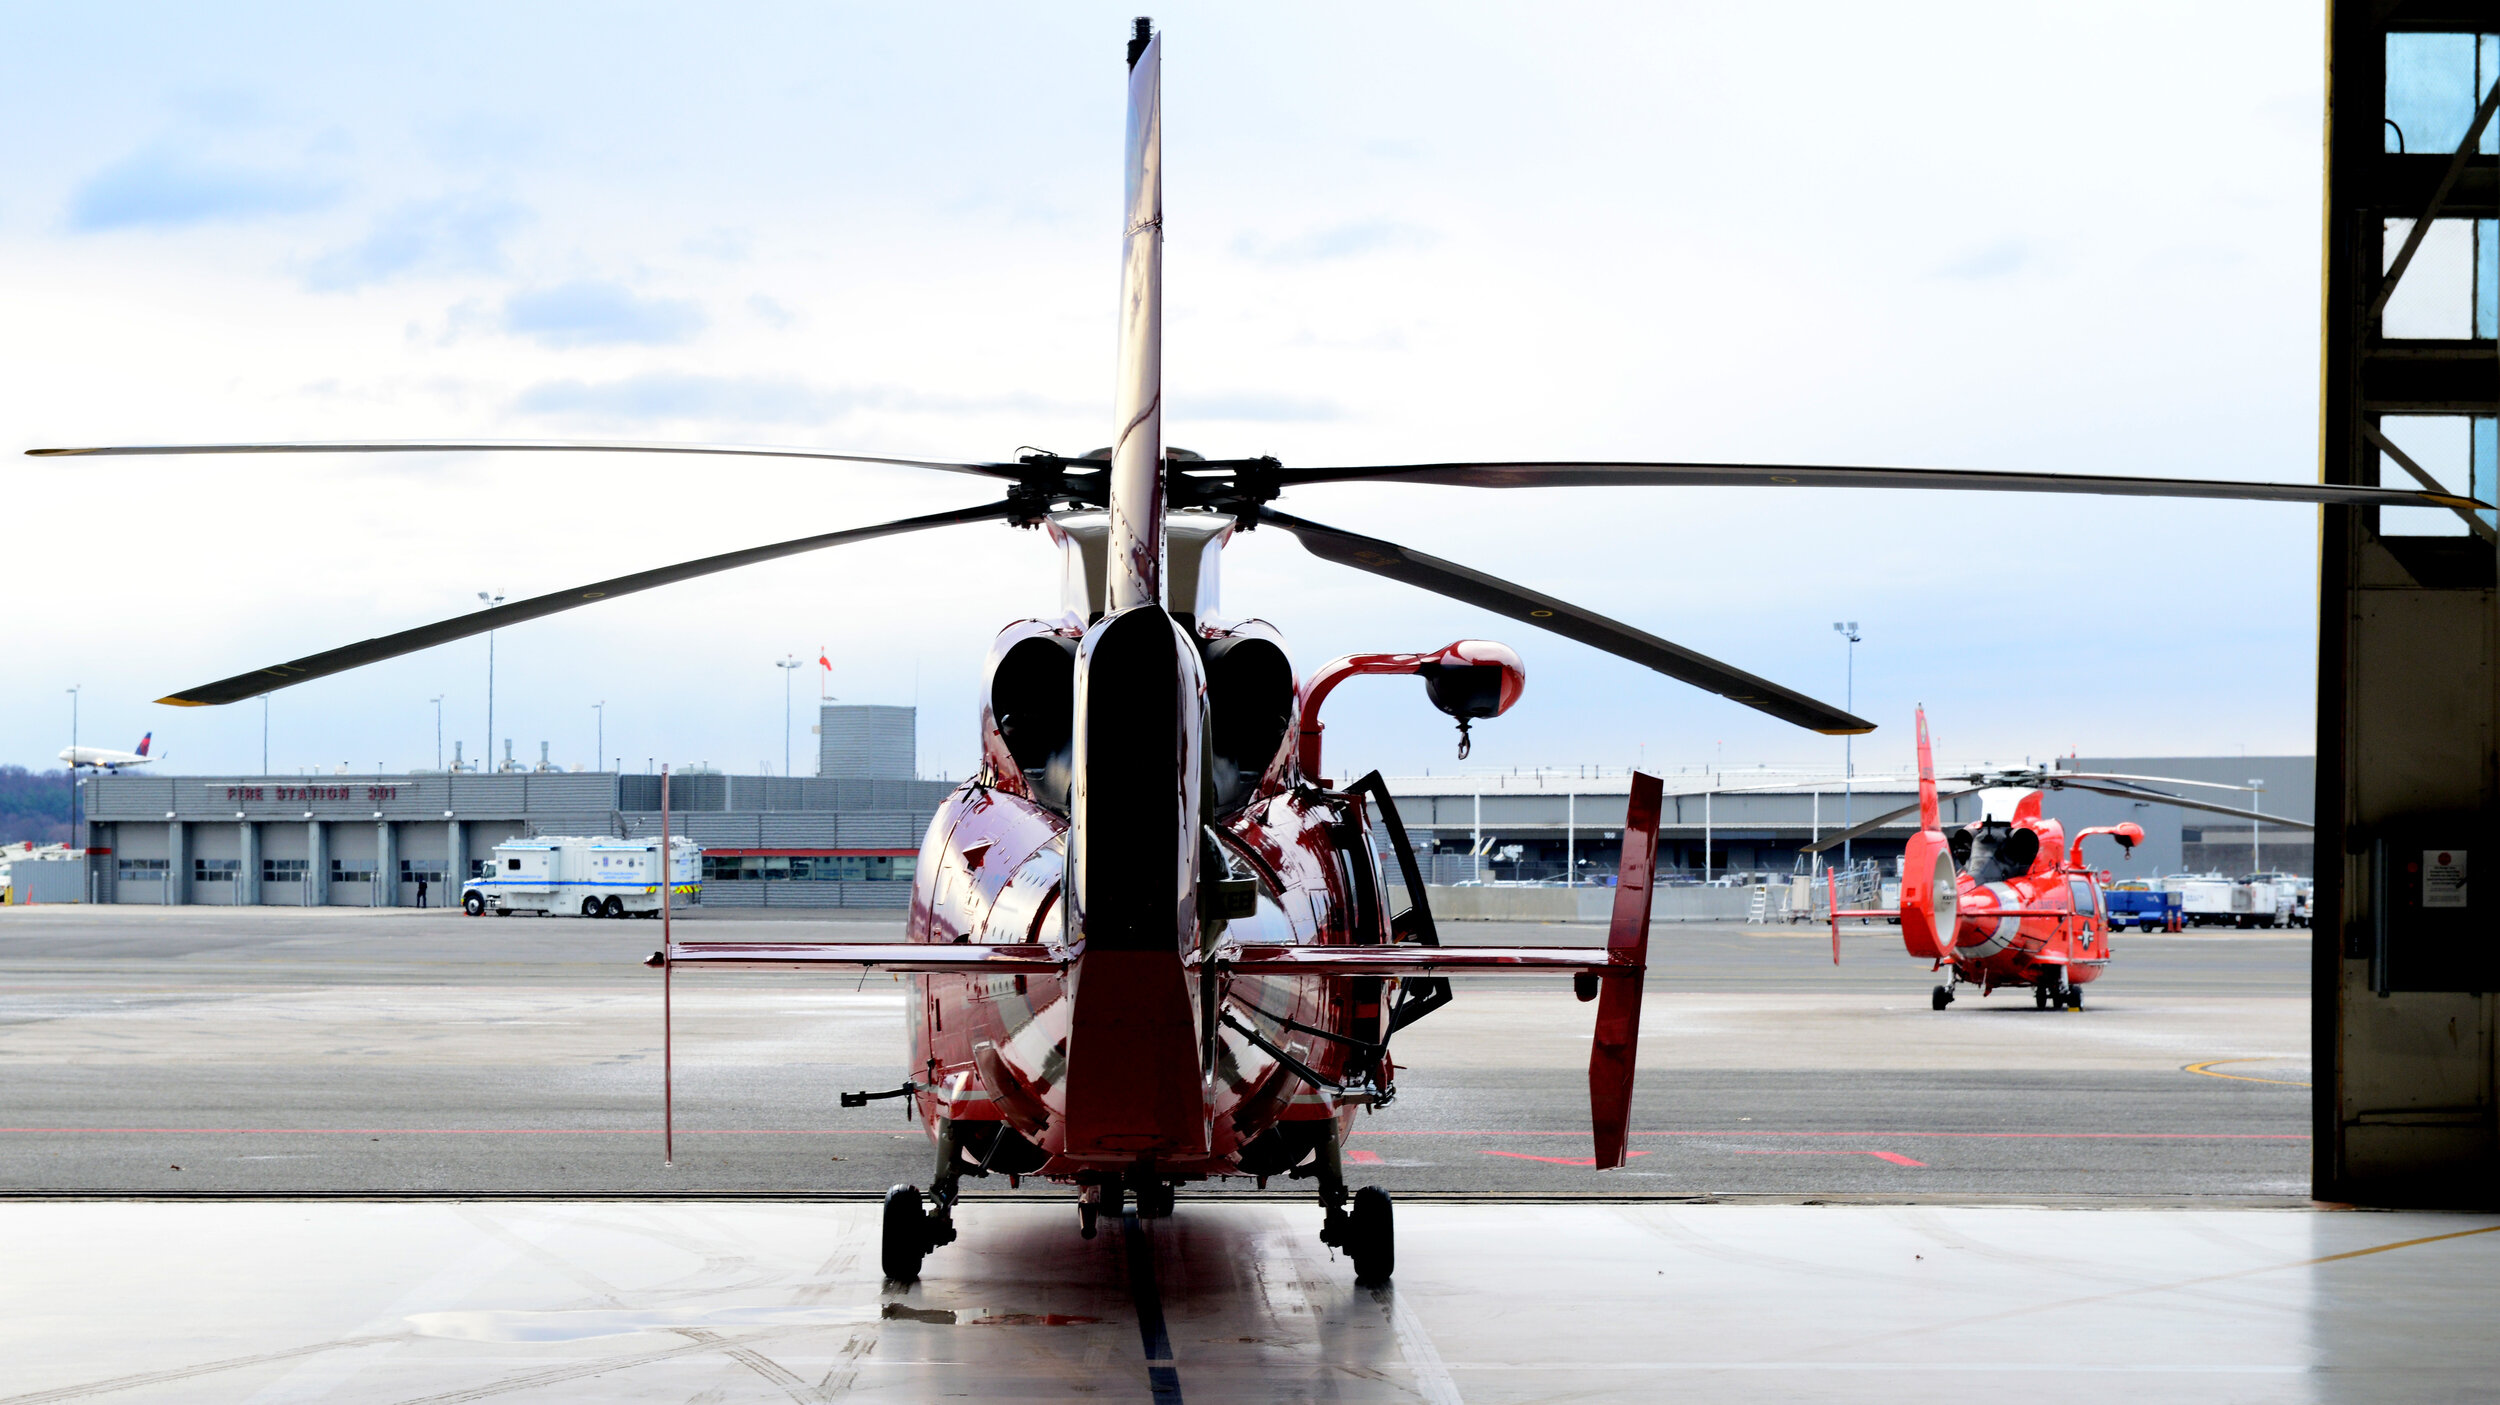  A Coast Guard MH-65 Dolphin helicopter taxis out of a hangar in Washington. Crews from Air Station Atlantic City support the National Capital Region Air Defense Facility by supplying multiple aircraft to assist the North American Aerospace Defense C